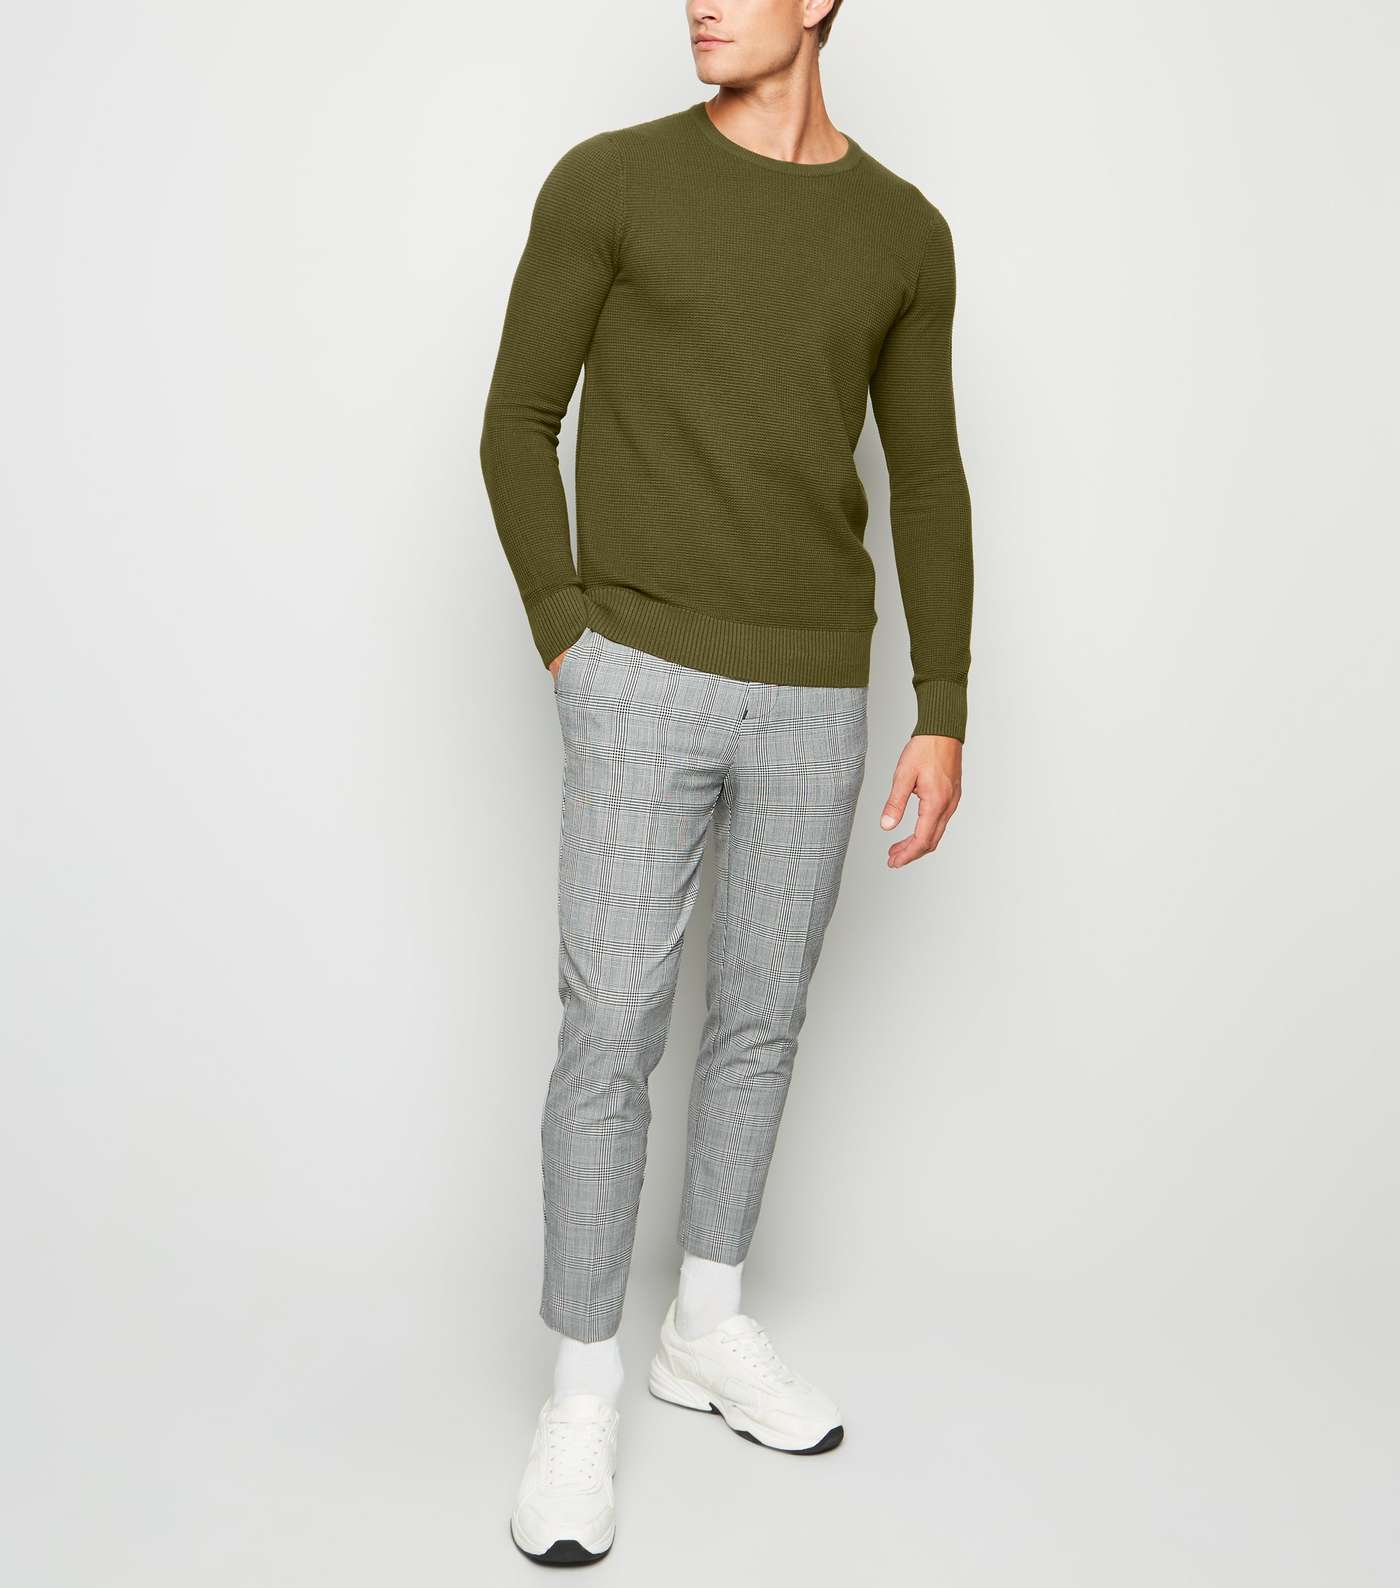 Olive Waffle Knit Muscle Fit Jumper Image 2